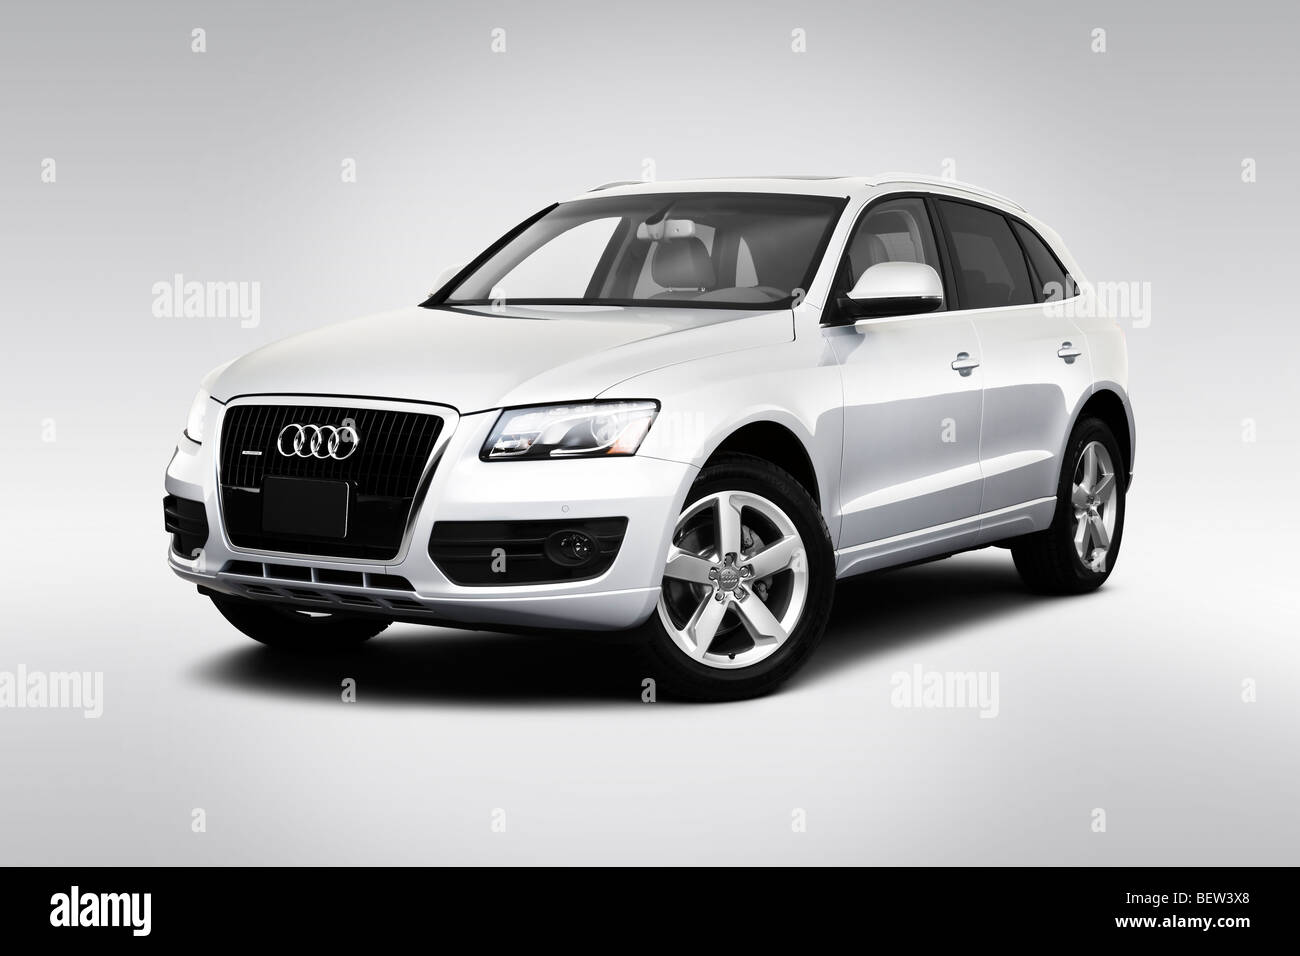 2010 Audi Q5 3.2 in Silver - Front angle view Stock Photo